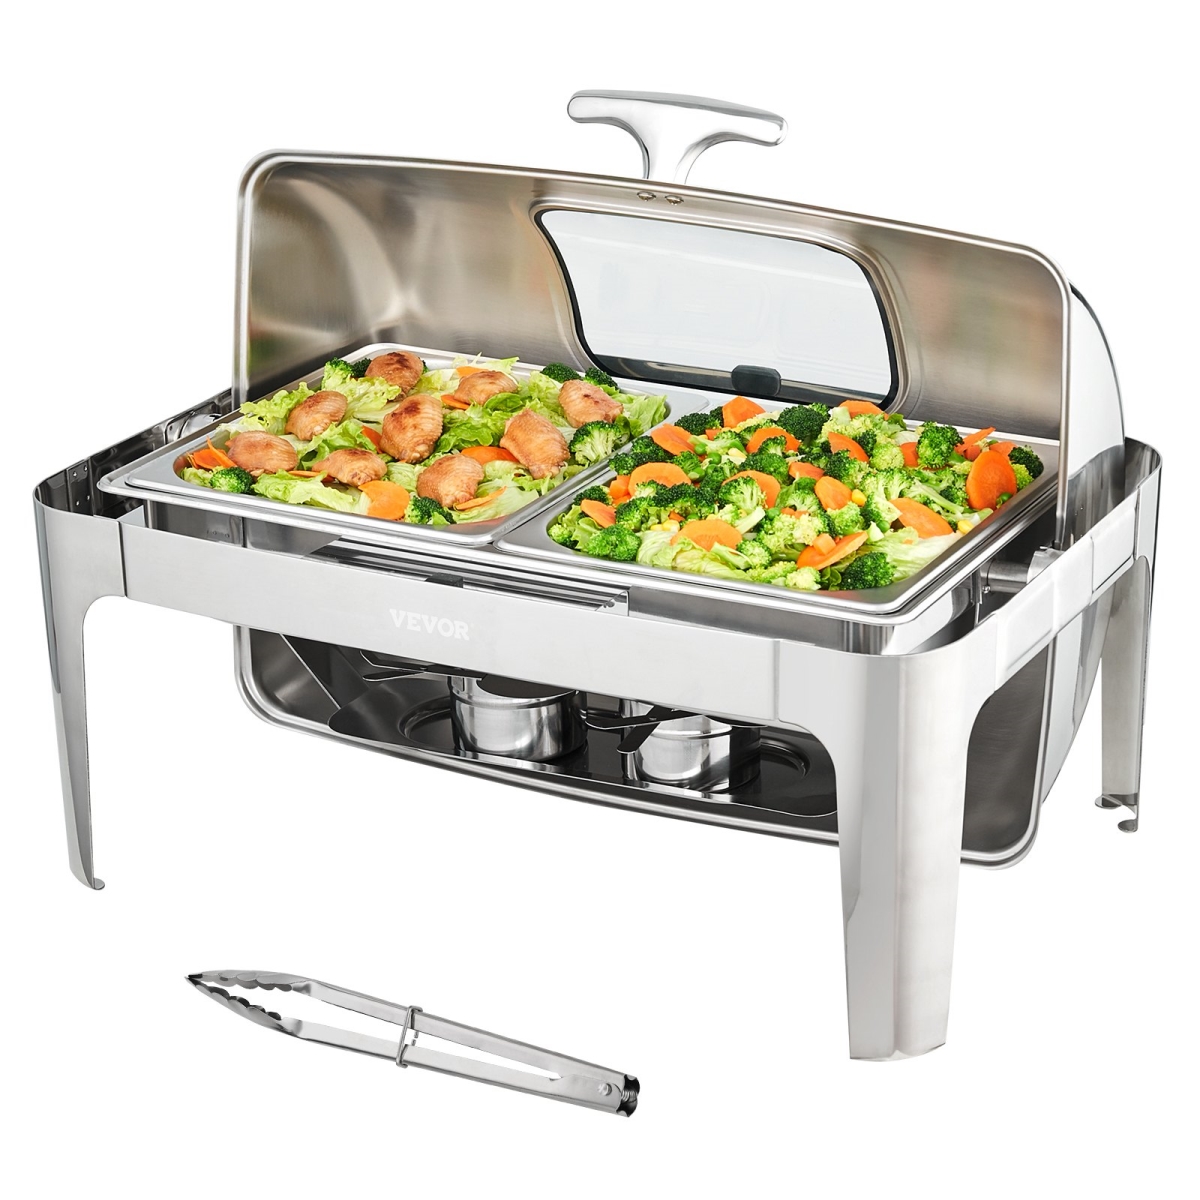 Picture of Vevor ZFXKCLJT19QT2B78CV0 9 qt. Roll Top Chafing Dish Buffet Set Stainless Steel Chafer with 2 Half Size Pans Rectangle Catering Warmer Server